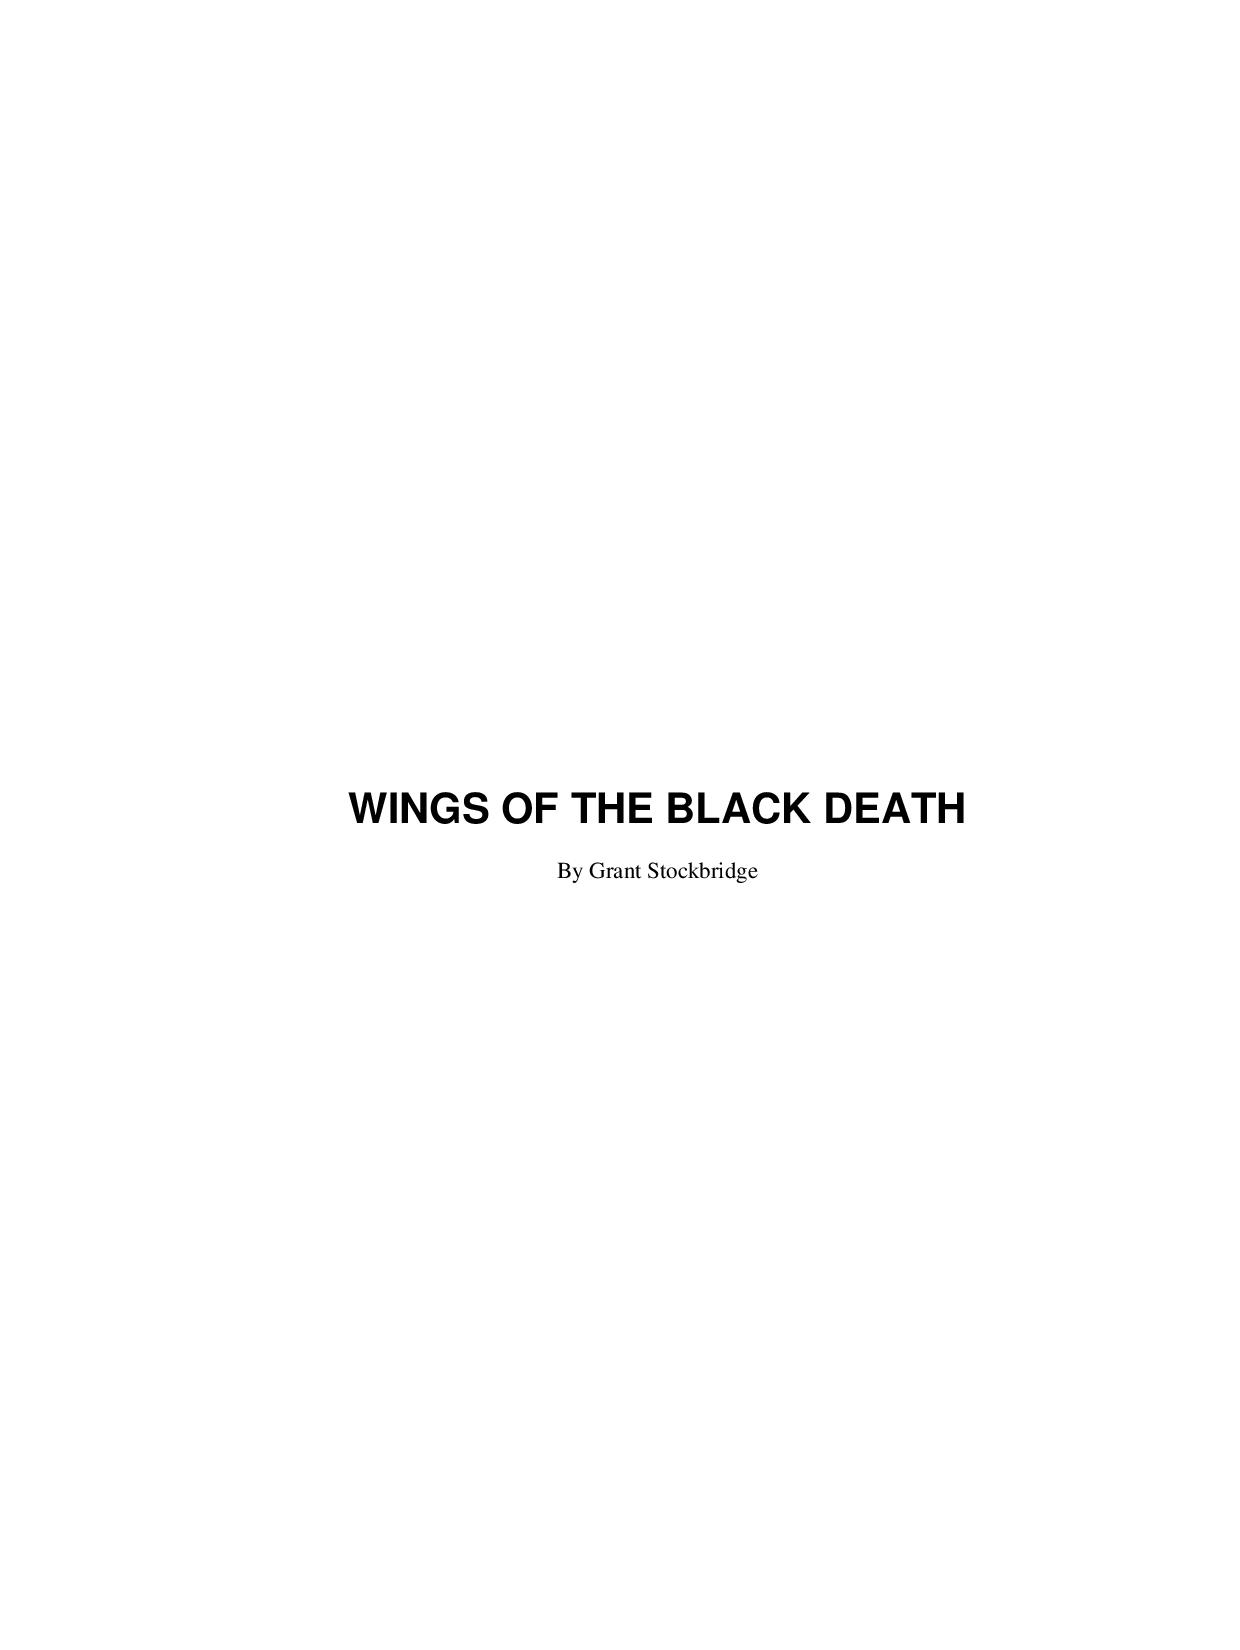 Book Cover For The Spider 3 - Wings of the Black Death - Grant Stockbridge